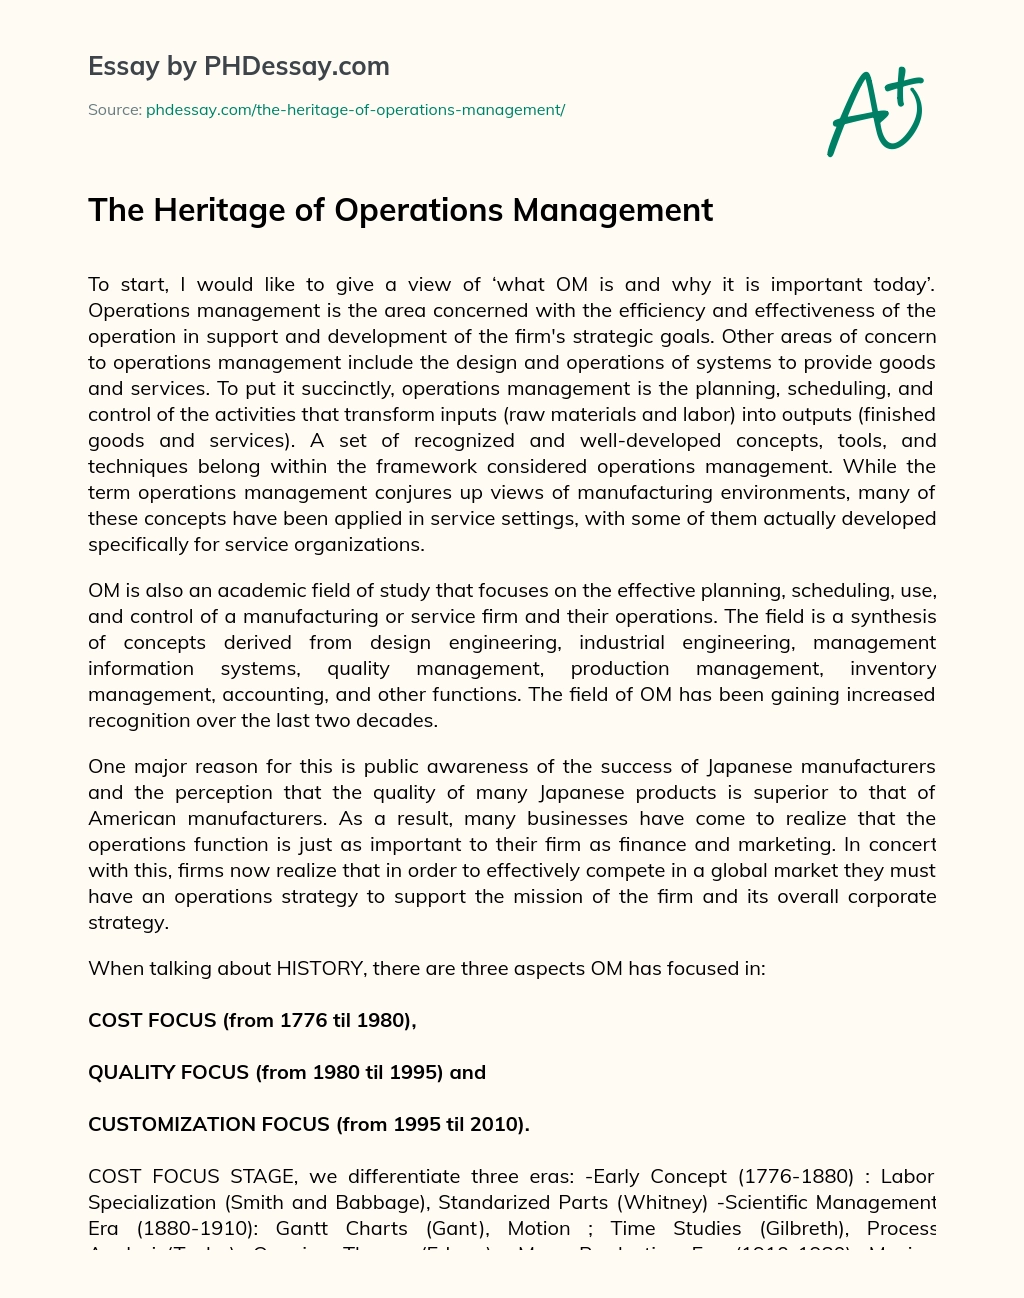 The Heritage of Operations Management essay